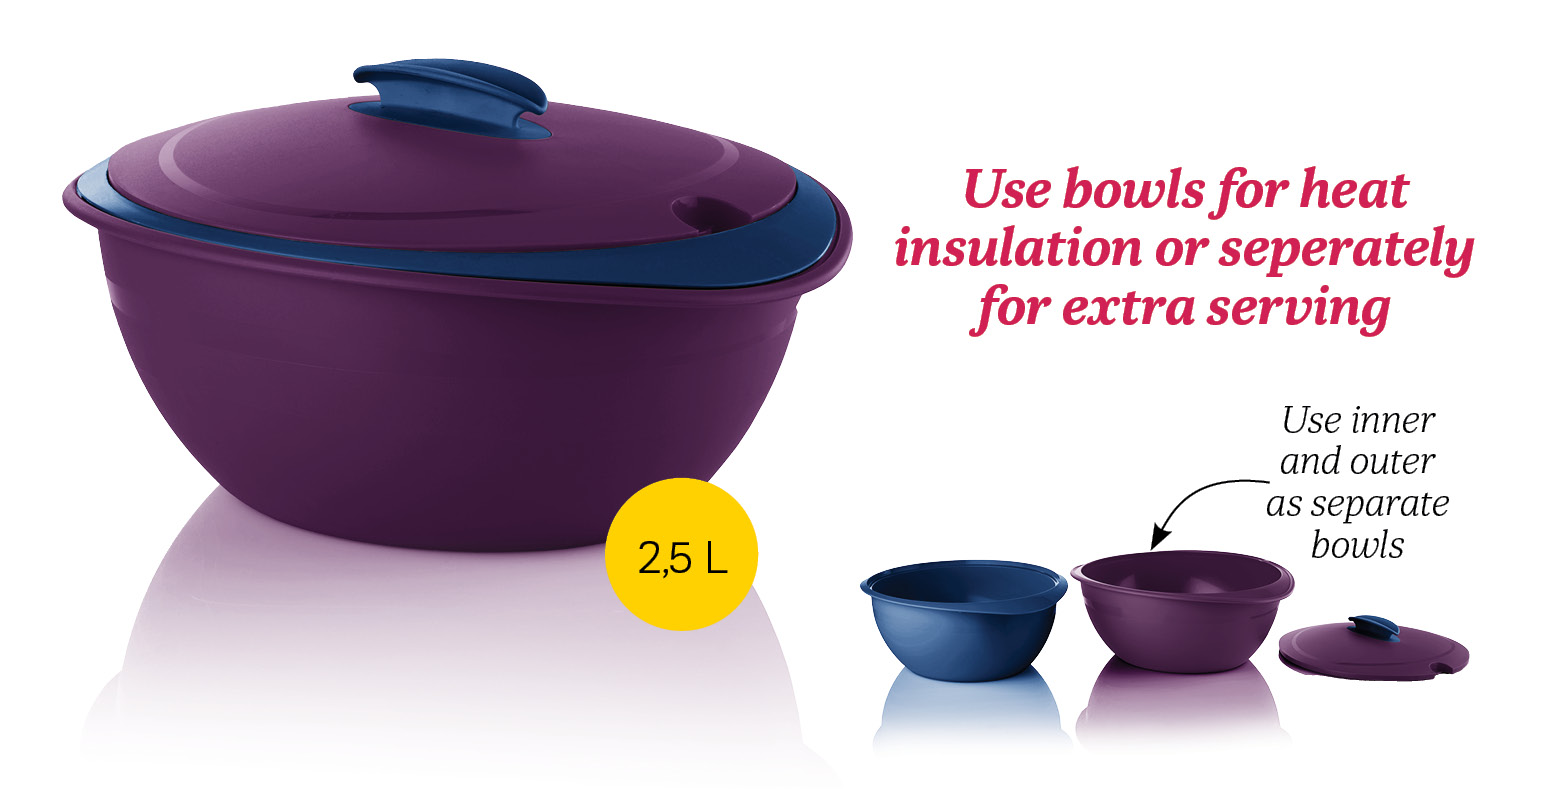 Tupperware GHANA - Ooh Yes!!! The Insulated Oval Server High is back.. Get  the @tupperware_ghana Insulated Oval Server High for 73 Cedis and save 22  Cedis Keep your food warmer for longer